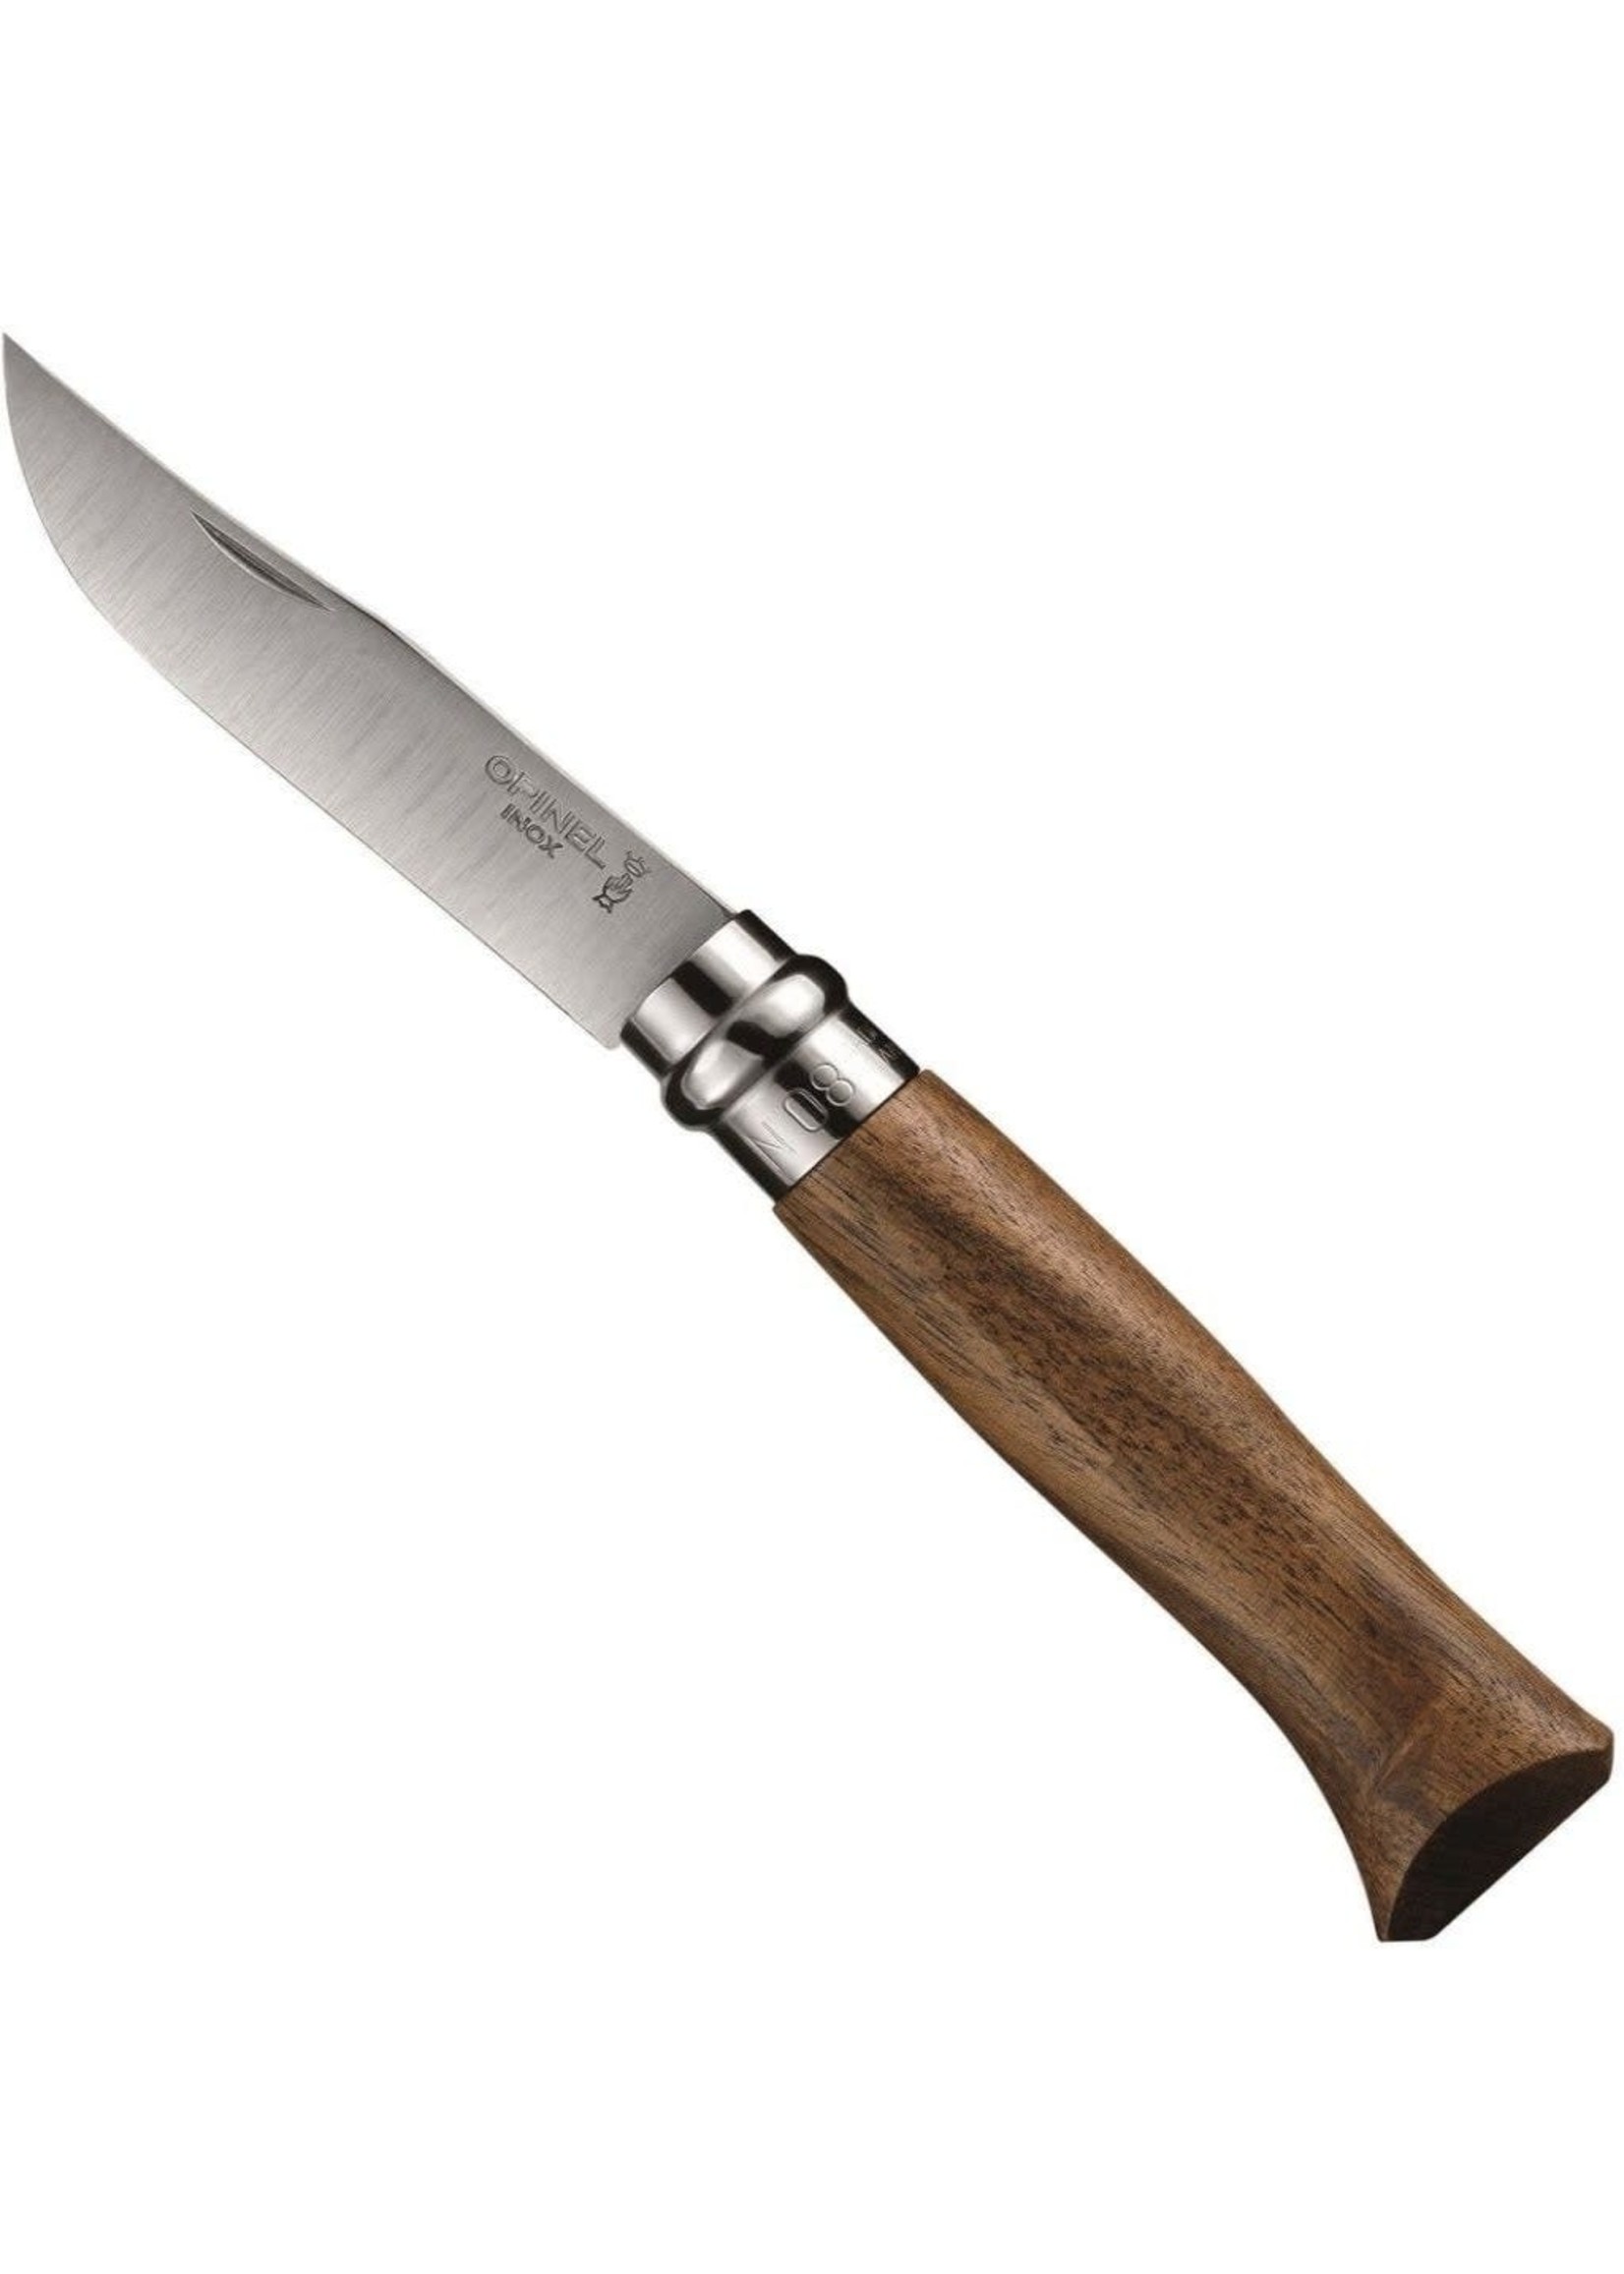 OPINEL NO. 8  STAINLESS STEEL KNIFE